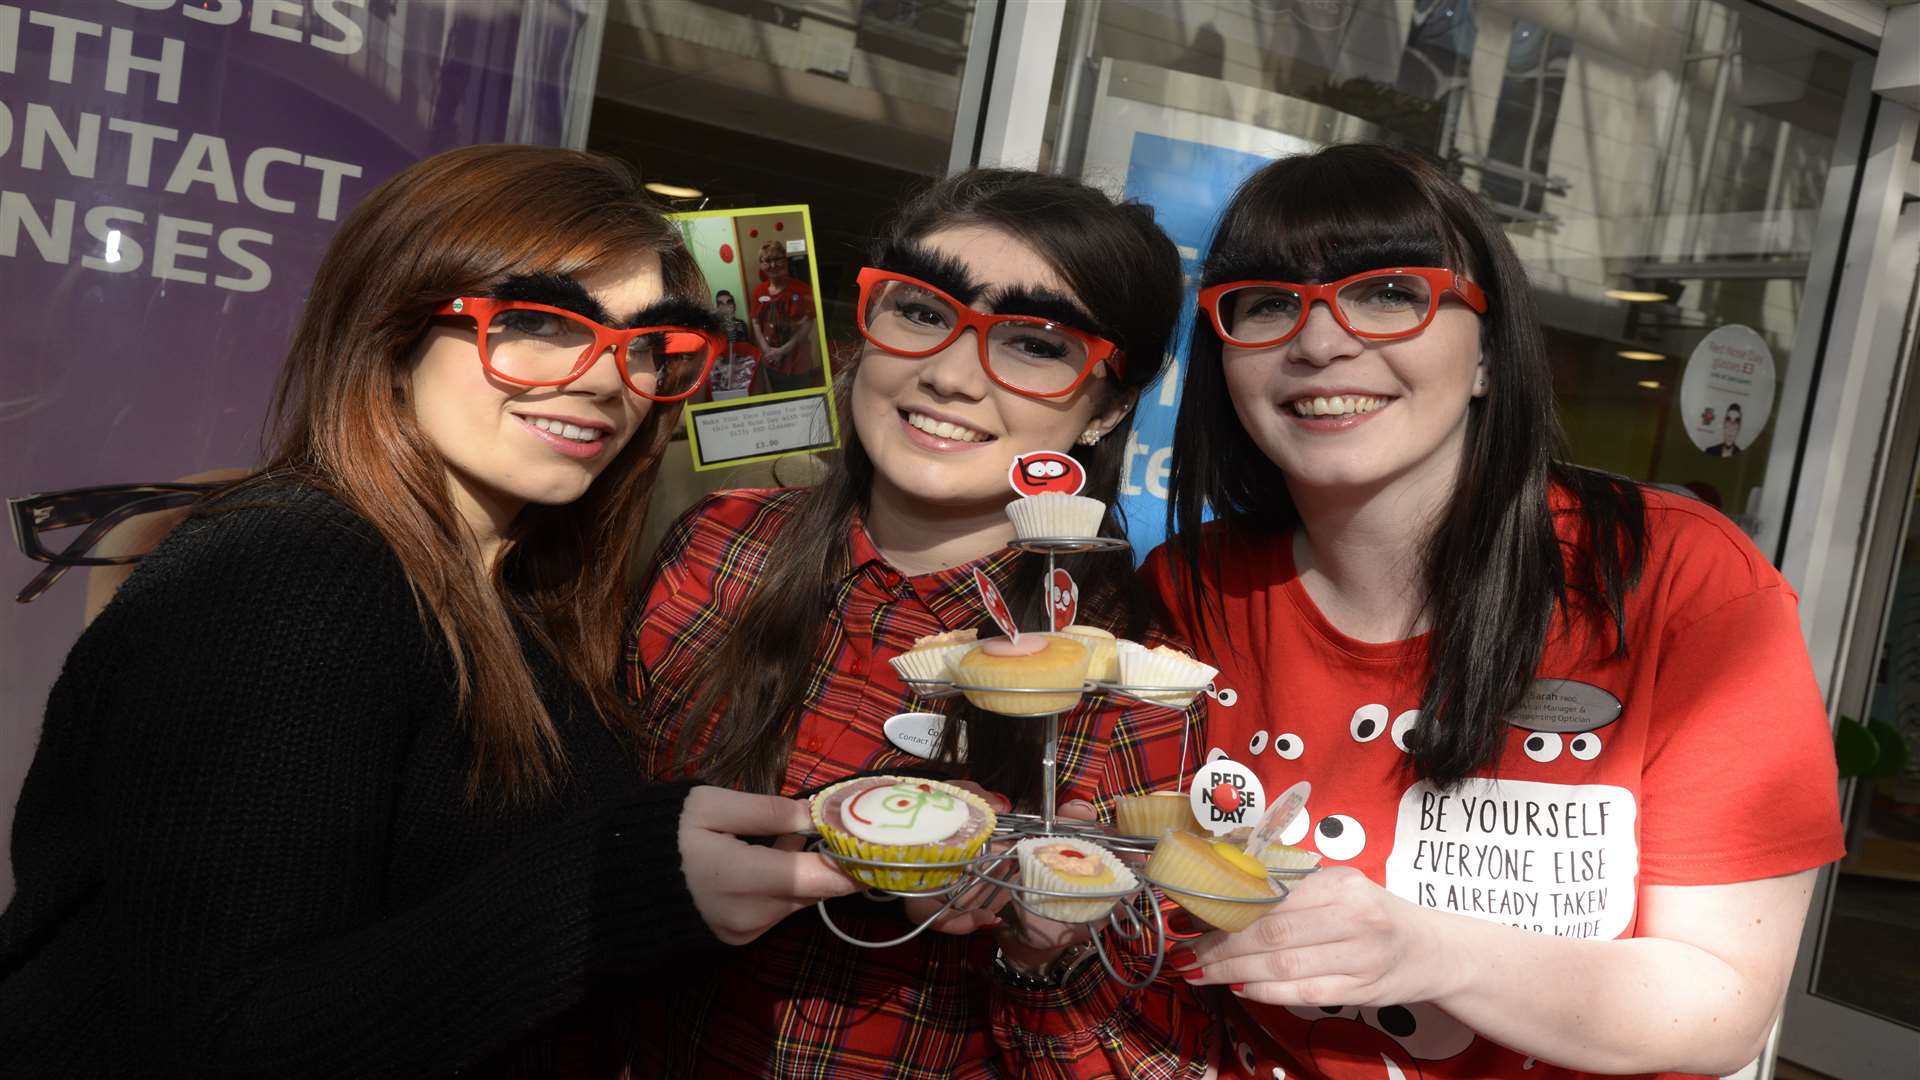 Kai Tuppen, Connie Davis and Sarah Gilliam busy selling cakes at Comic Relief Red Nose fundraiser